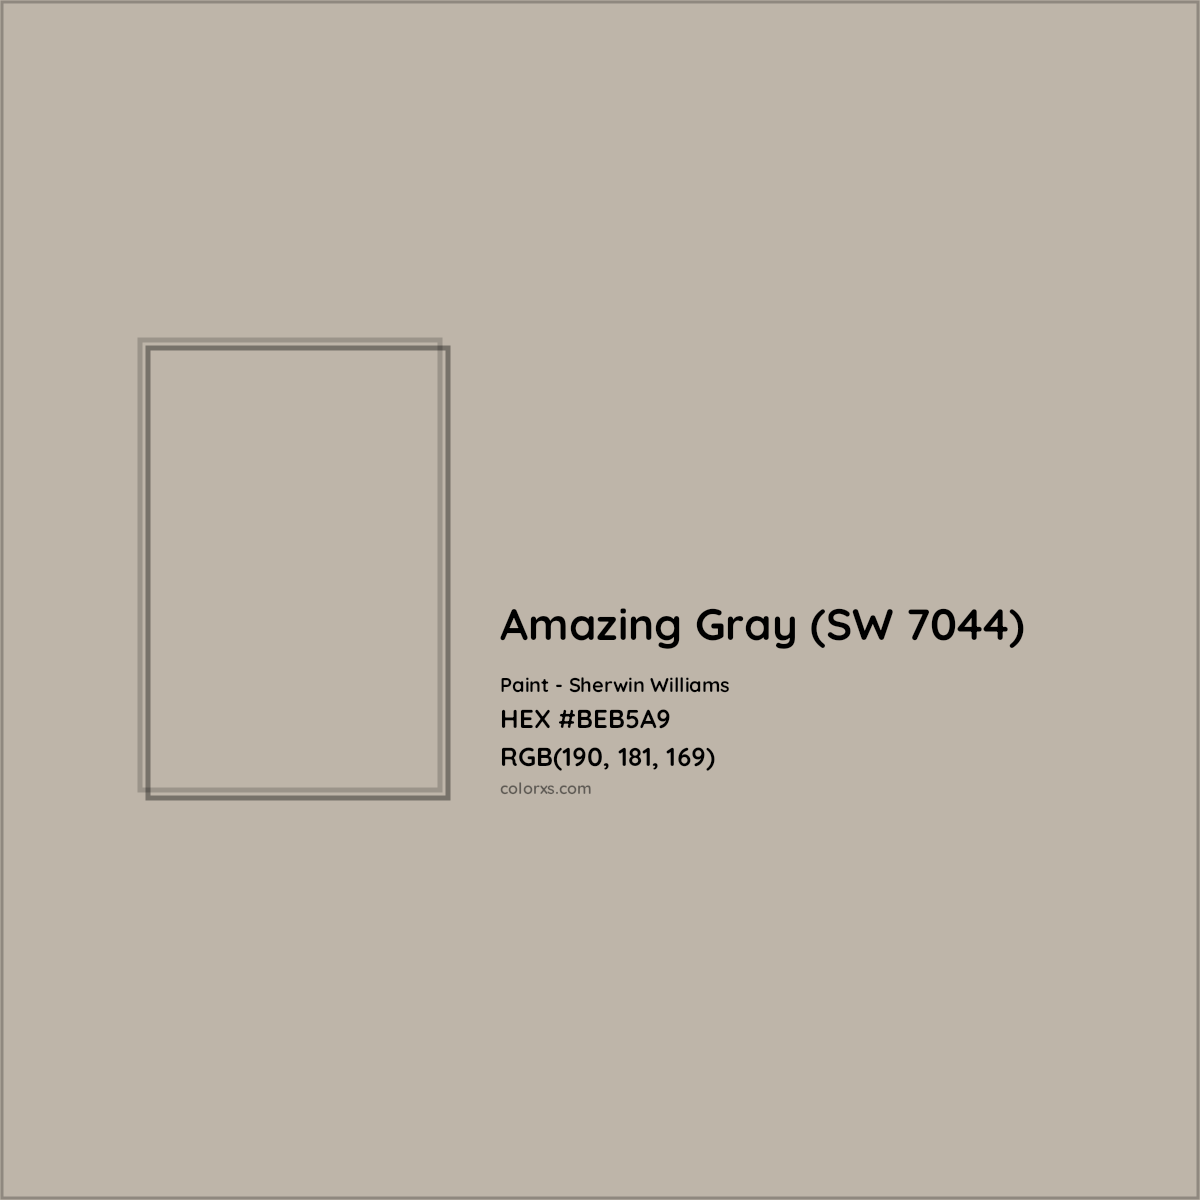 HEX #BEB5A9 Amazing Gray (SW 7044) Paint Sherwin Williams - Color Code